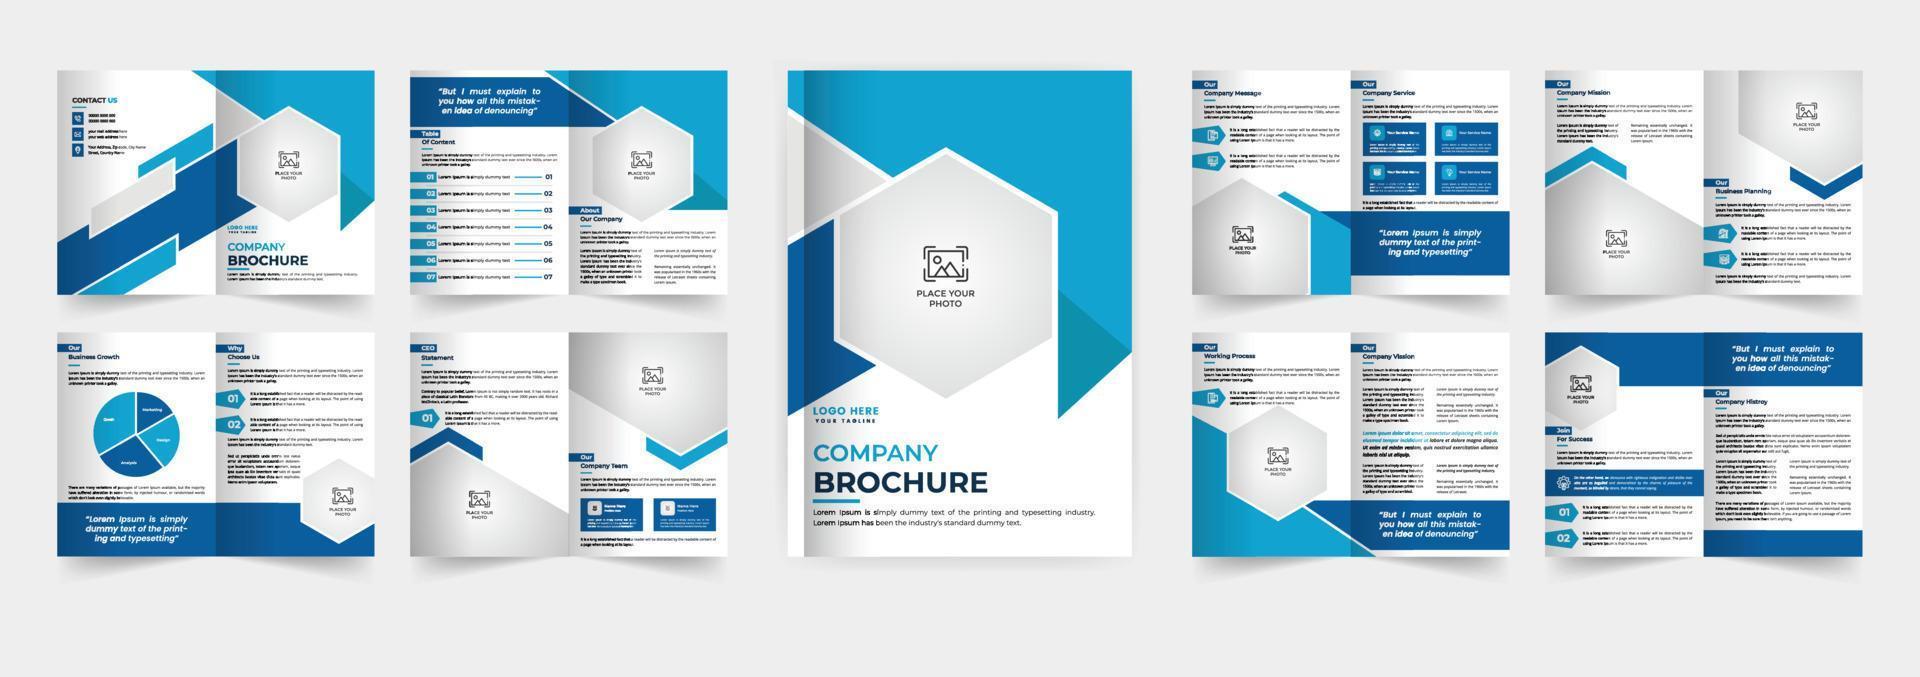 16 Pages corporate brochure template design multipage brochure vector